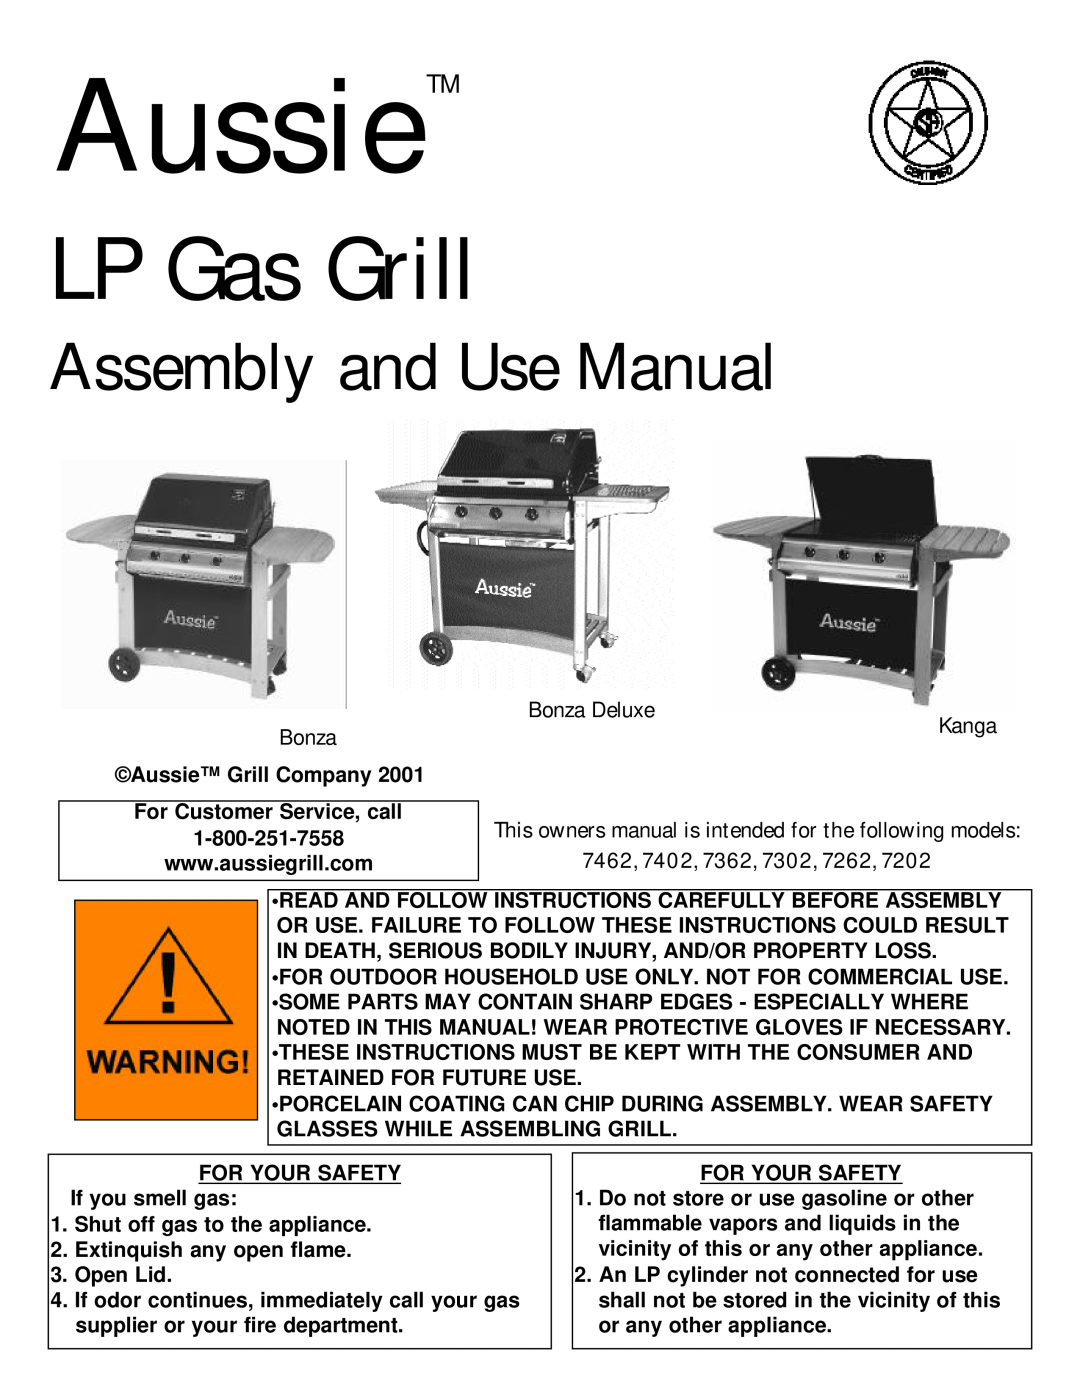 Aussie Bonza Deluxe owner manual AussieTM, LP Gas Grill, Assembly and Use Manual, Extinquish any open flame 3. Open Lid 